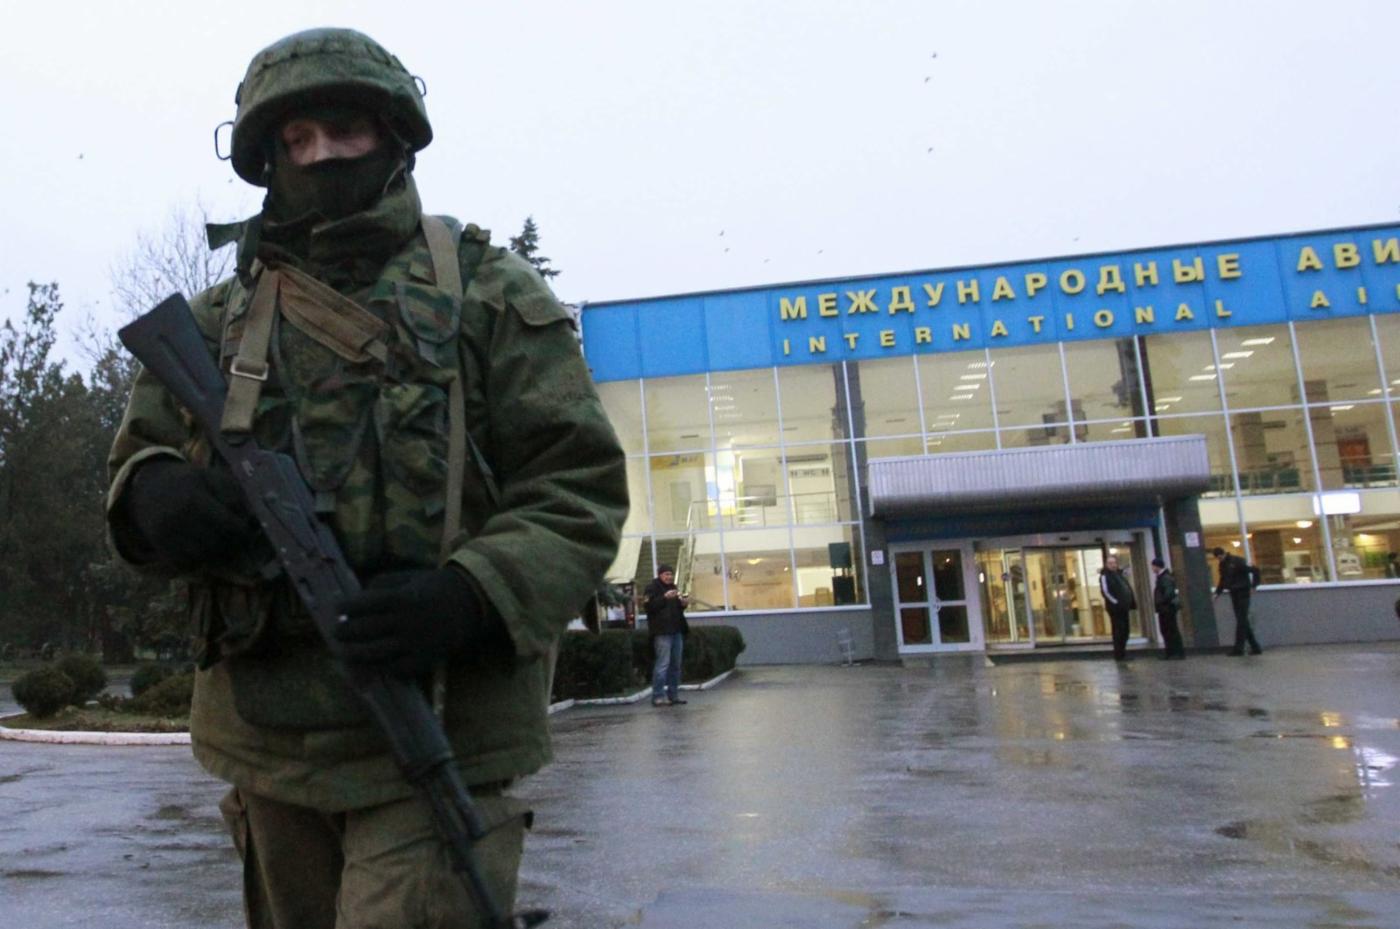  Russia’s illegal annexation of Crimea in 2014. A Russian patrol stands at the international airport in Crimea.
